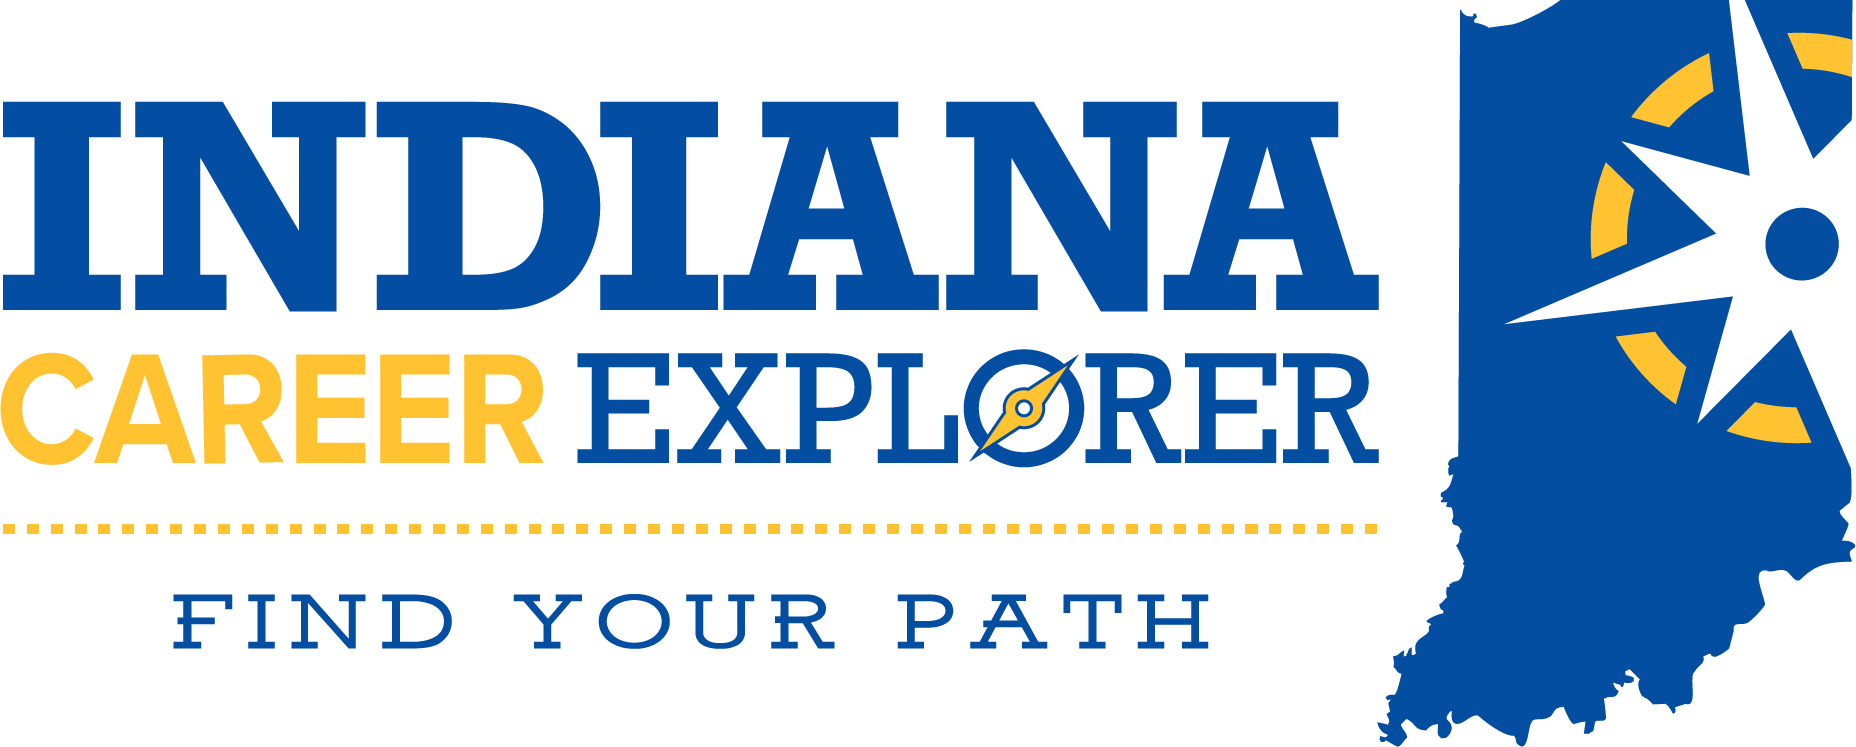 Indiana Career Explorer logo that takes you to the website